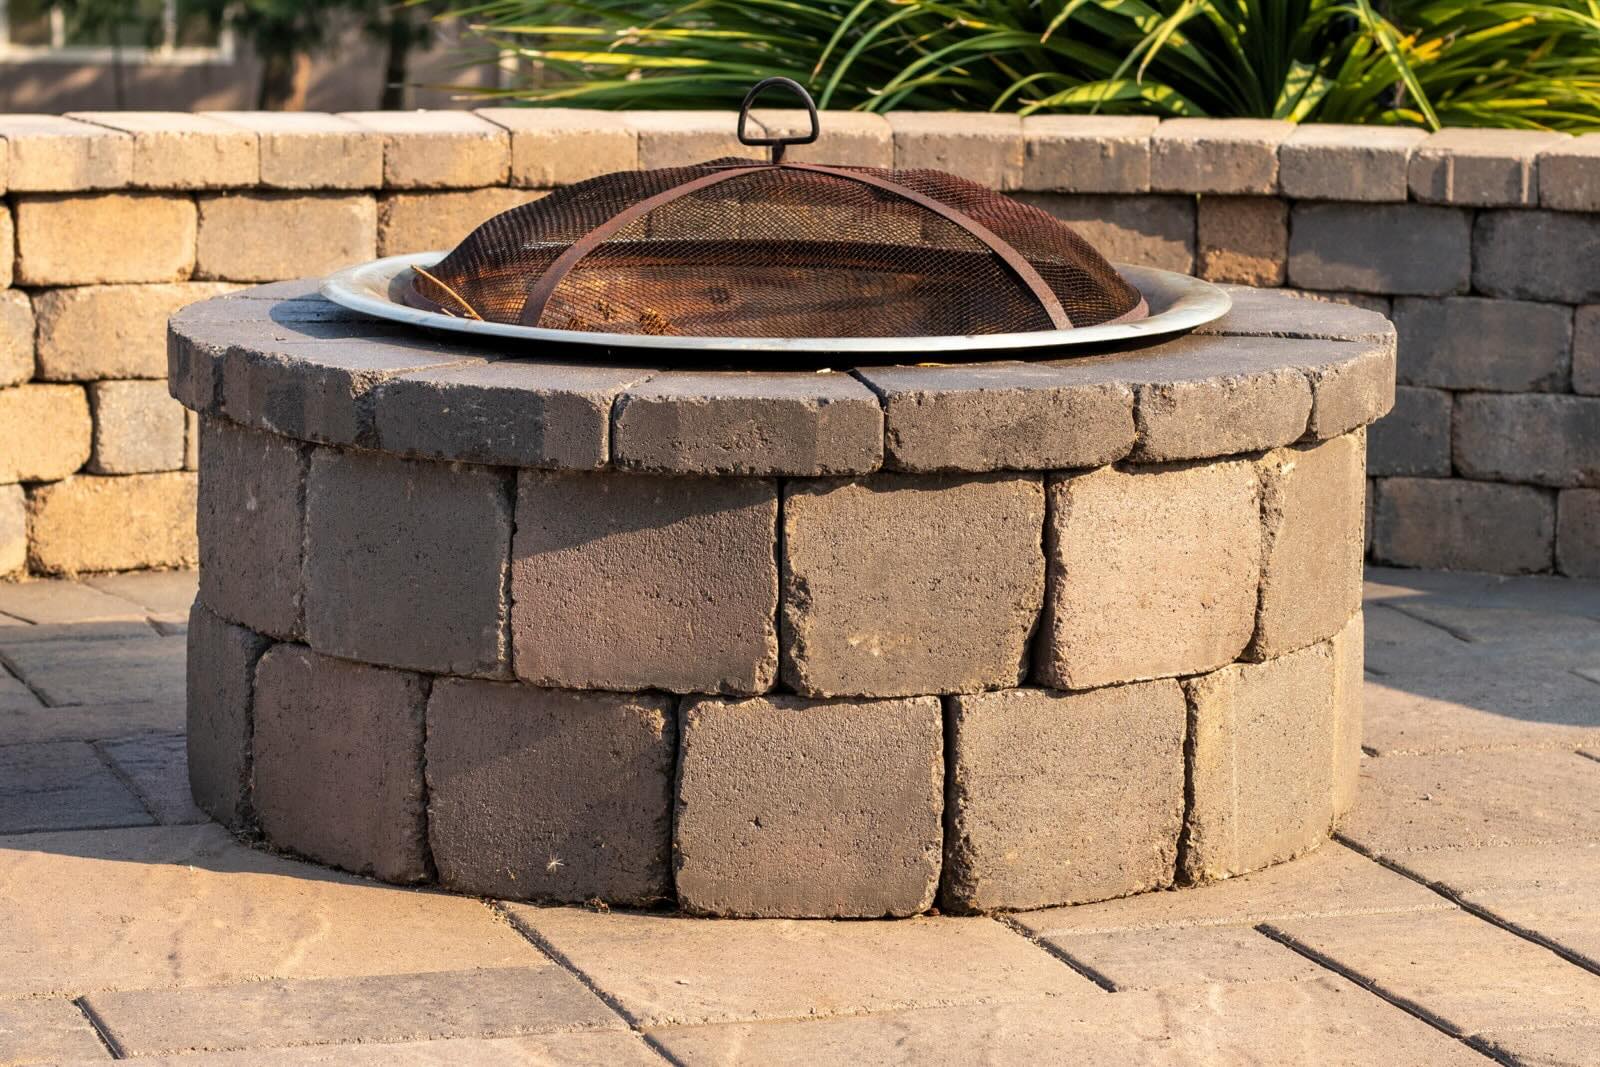 How Many Paver Stones For A Fire Pit